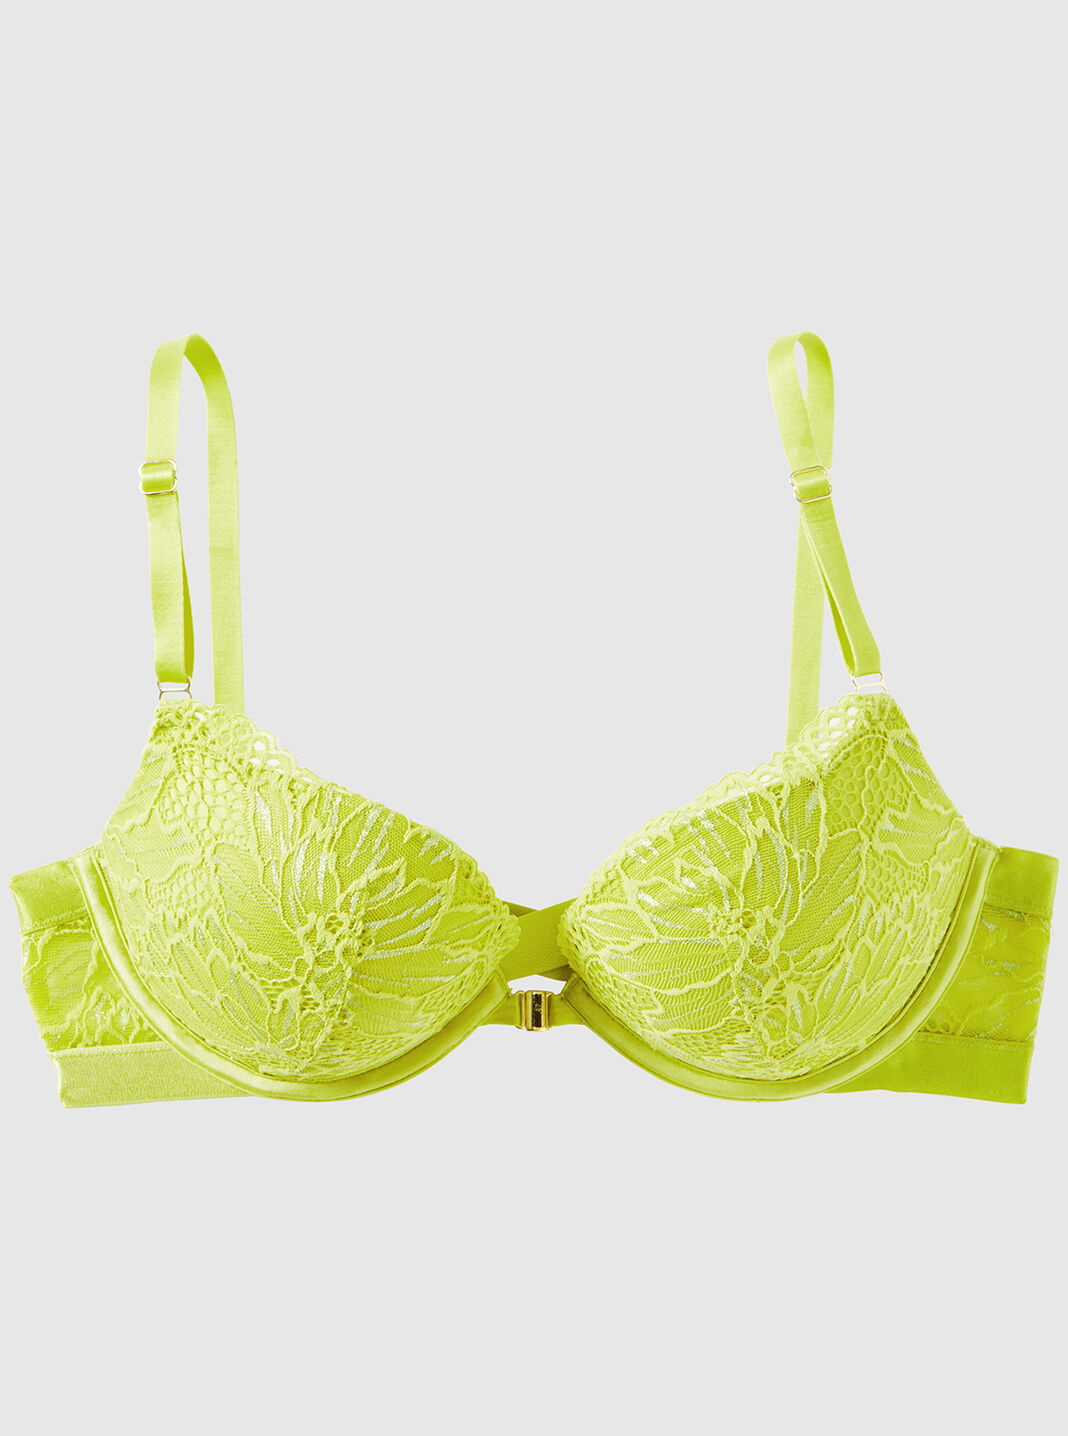 Wholesale Hot Sexi Girl Bras Cotton, Lace, Seamless, Shaping 